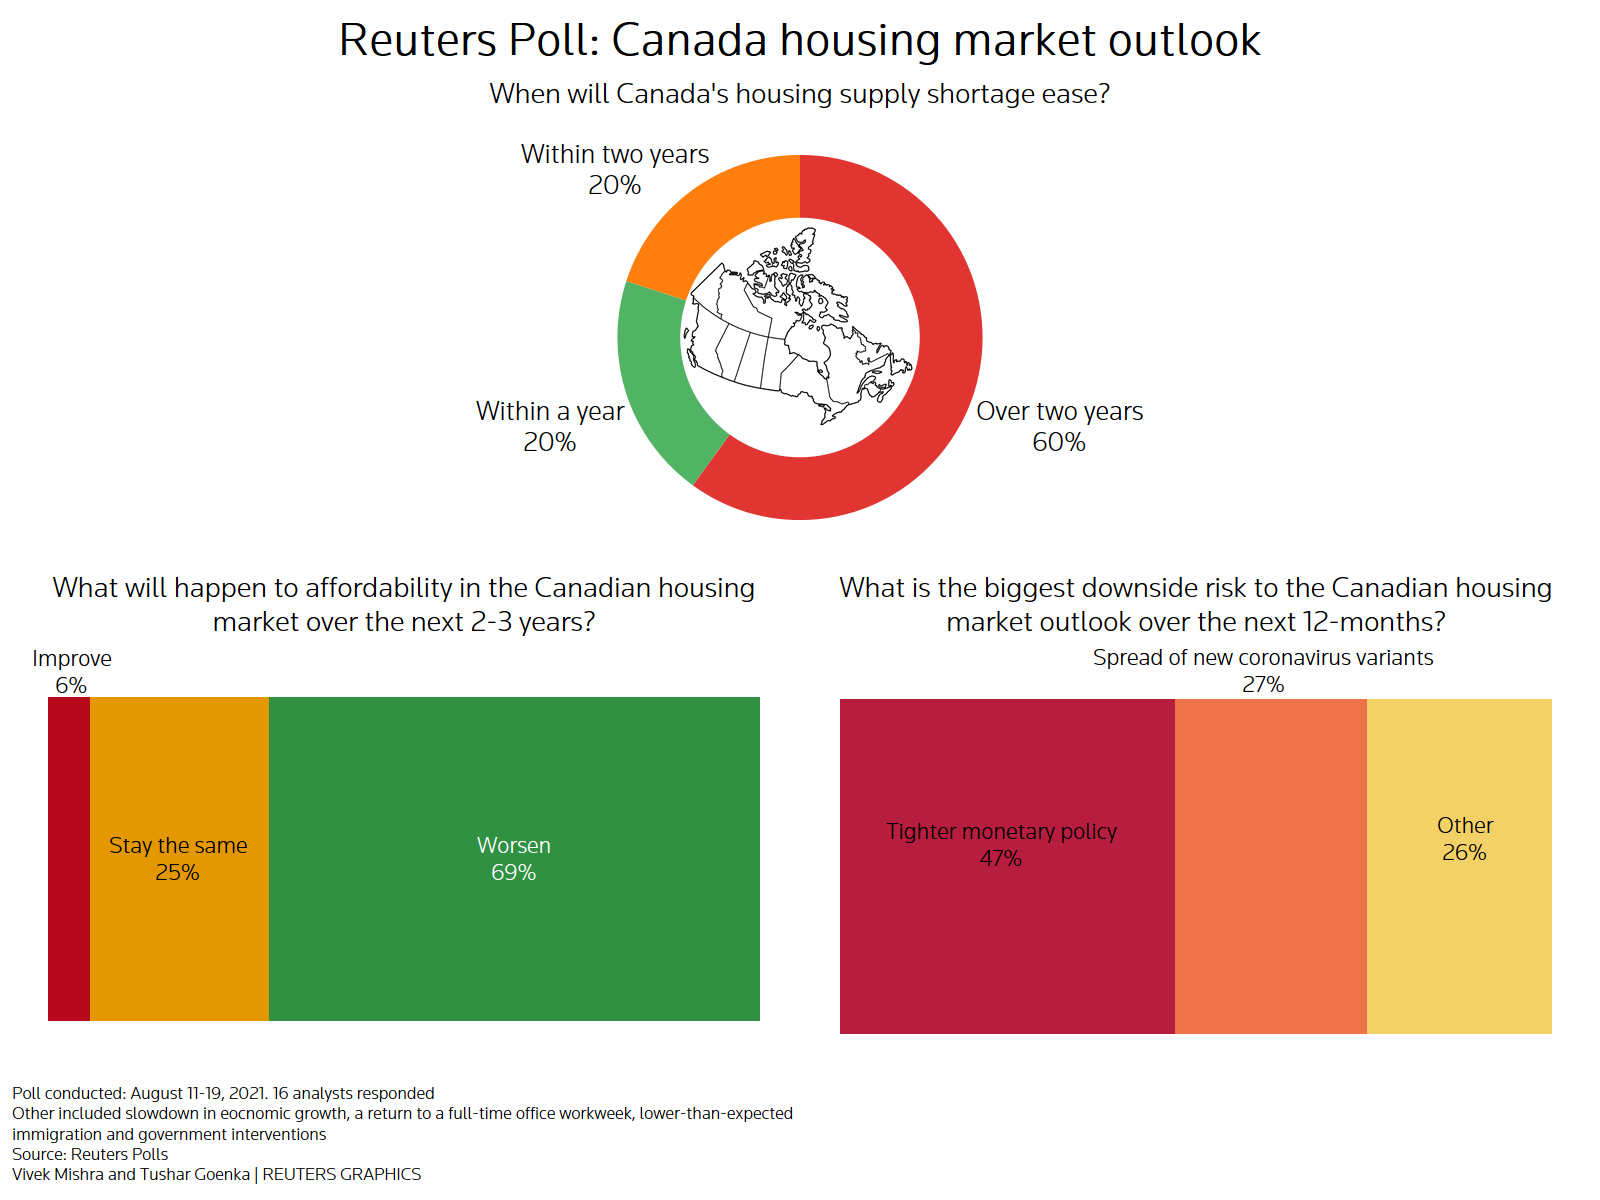 Reuters poll graphics on the Canada housing market outlook: